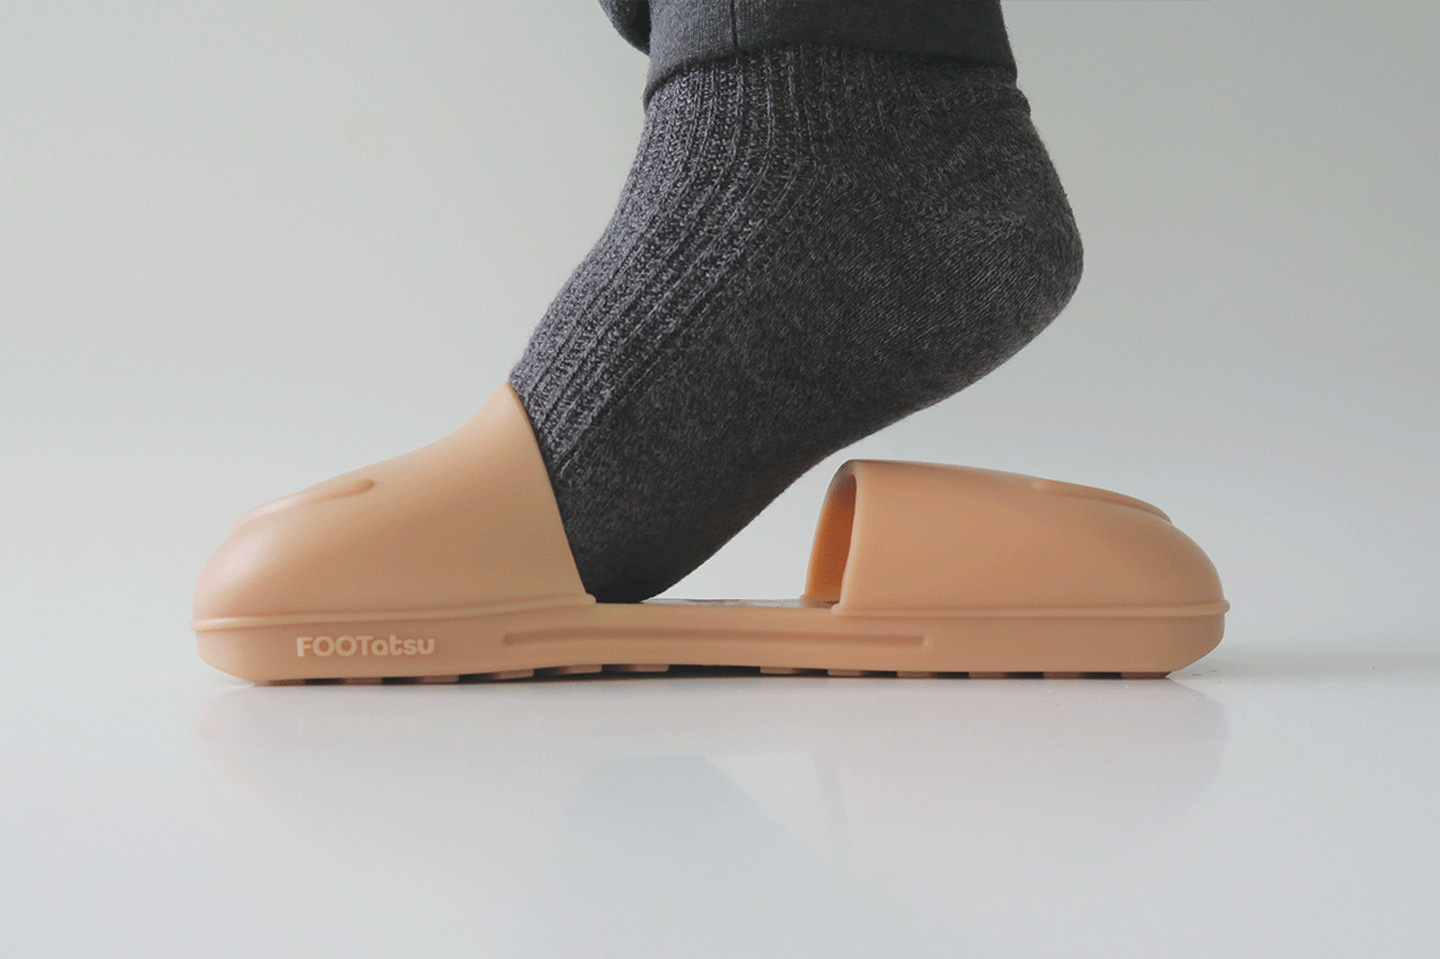 #Absurdly clever slipper was designed to be worn in any direction